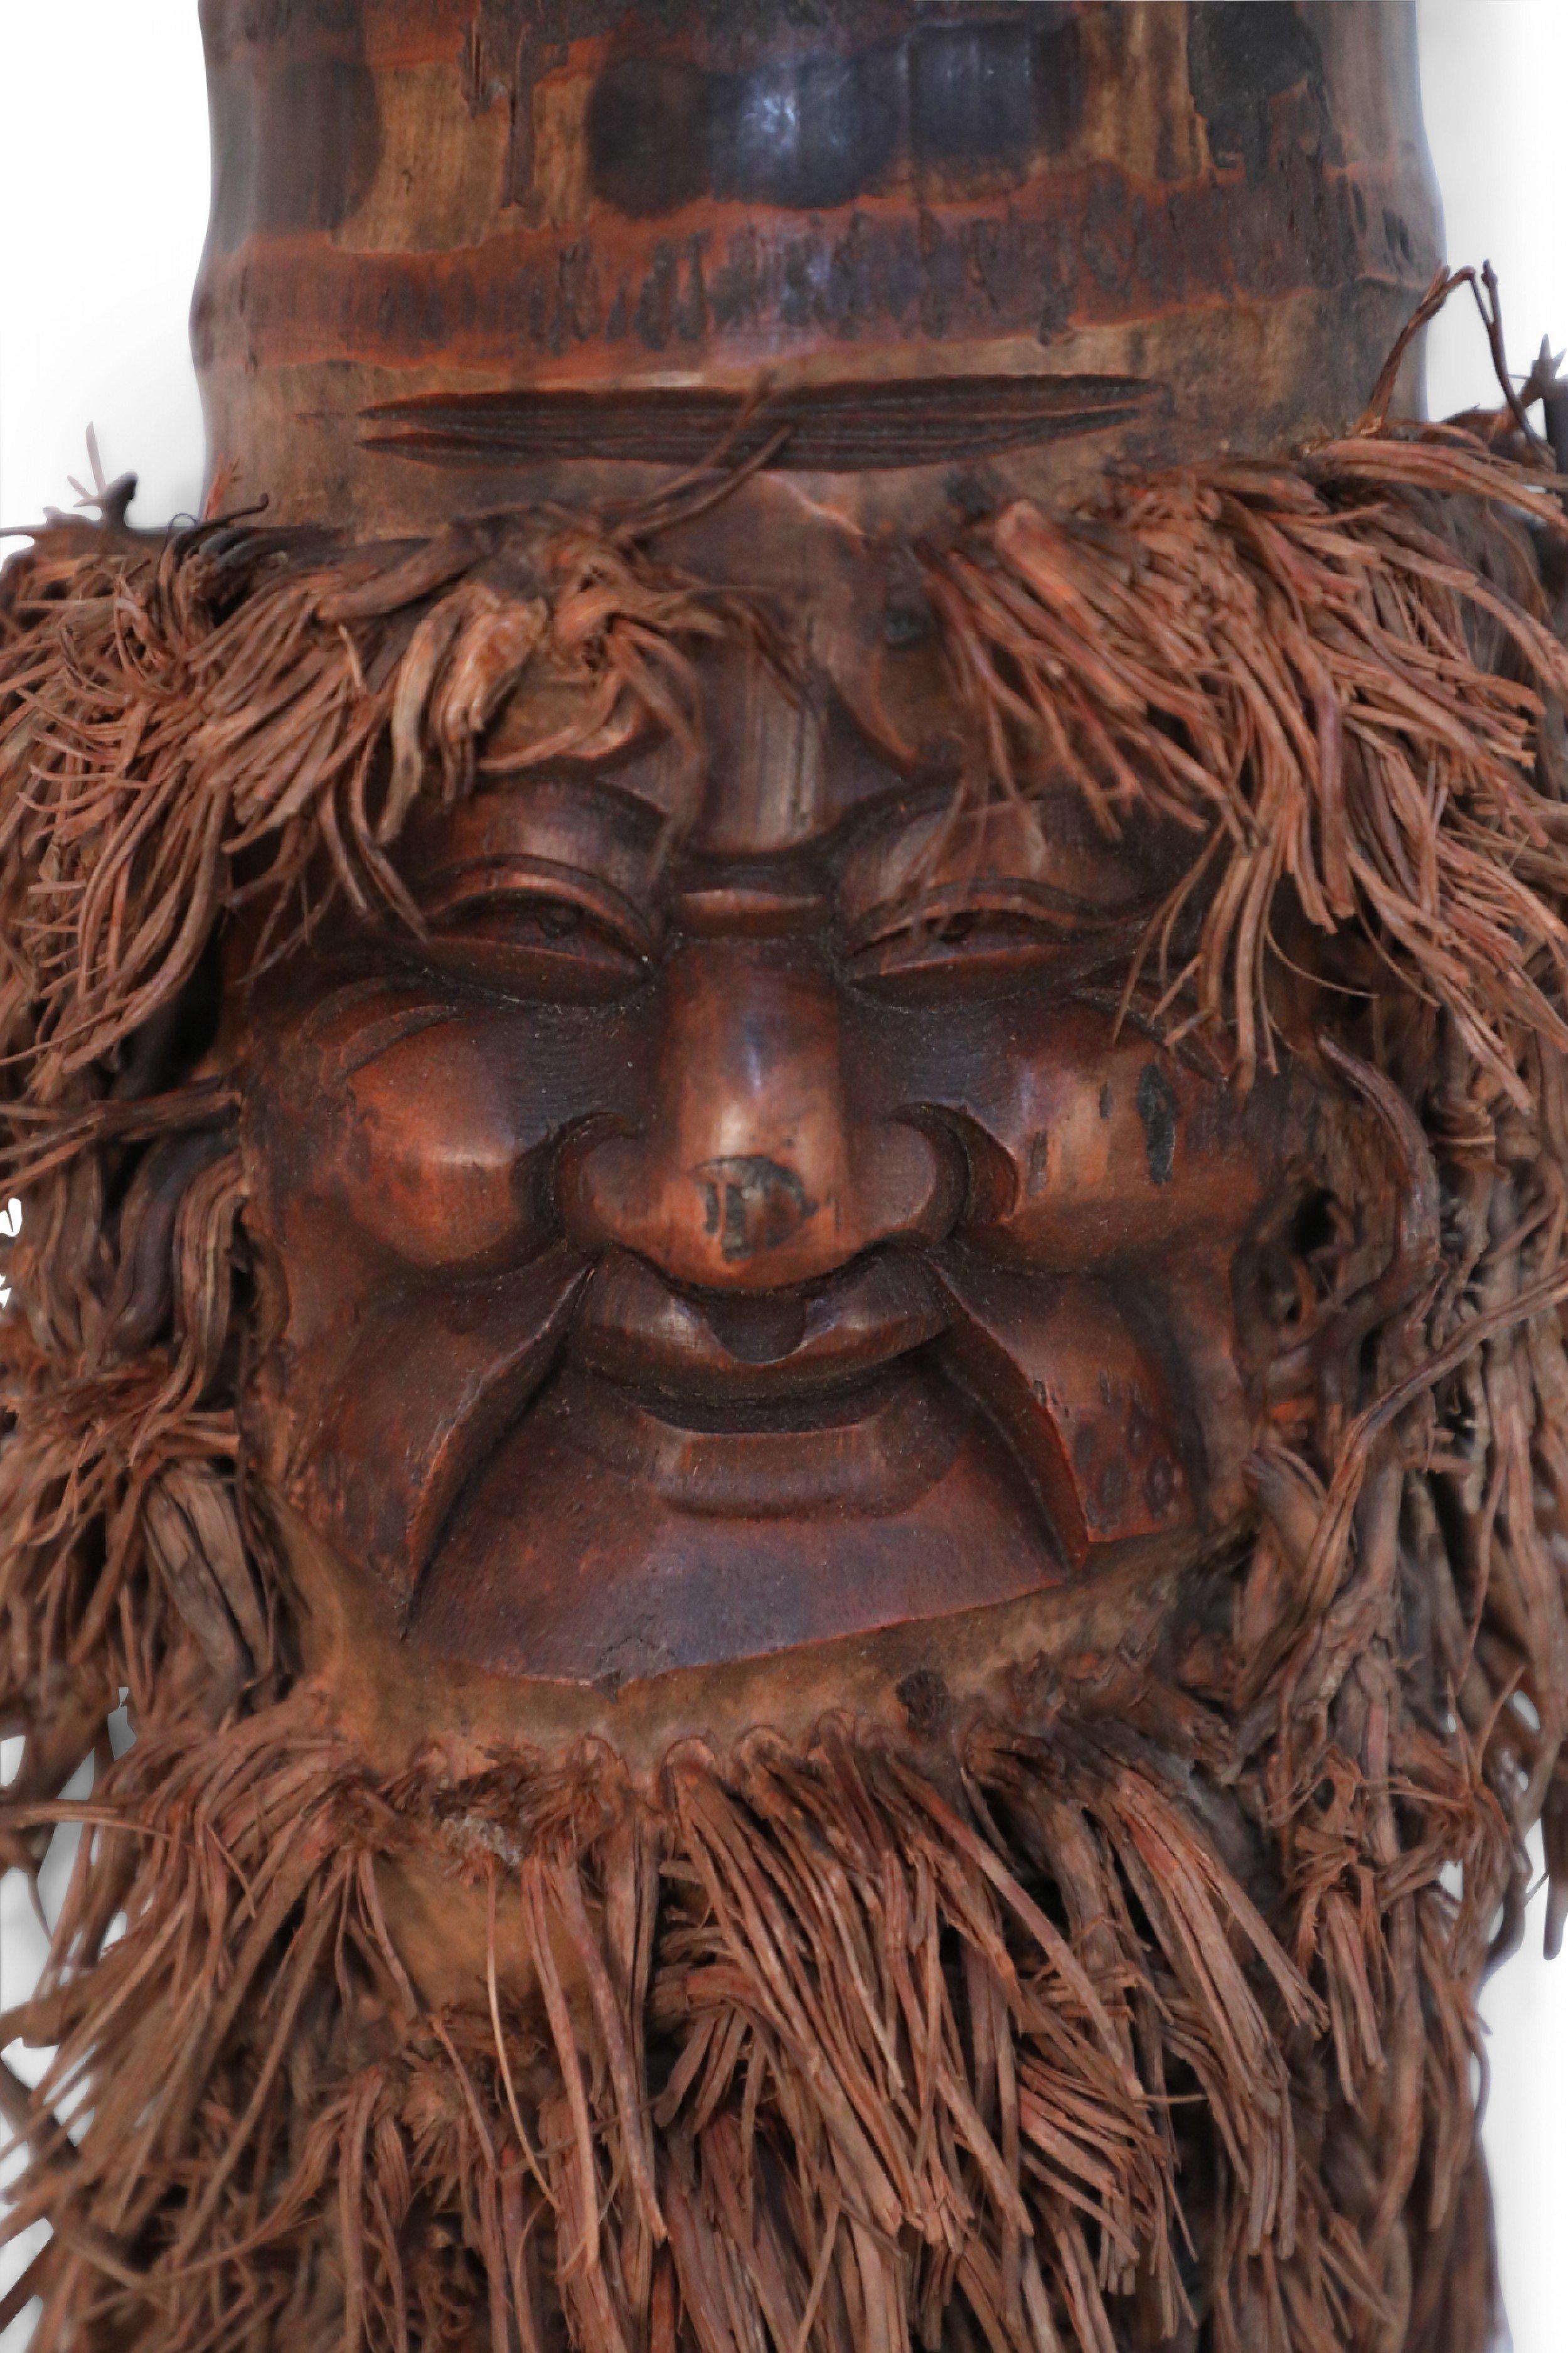 Chinese wall plaque made from a bamboo root carved in the shape of a smiling face with a bamboo root fiber beard. (Companion pieces: NWL2543A-F).    
   